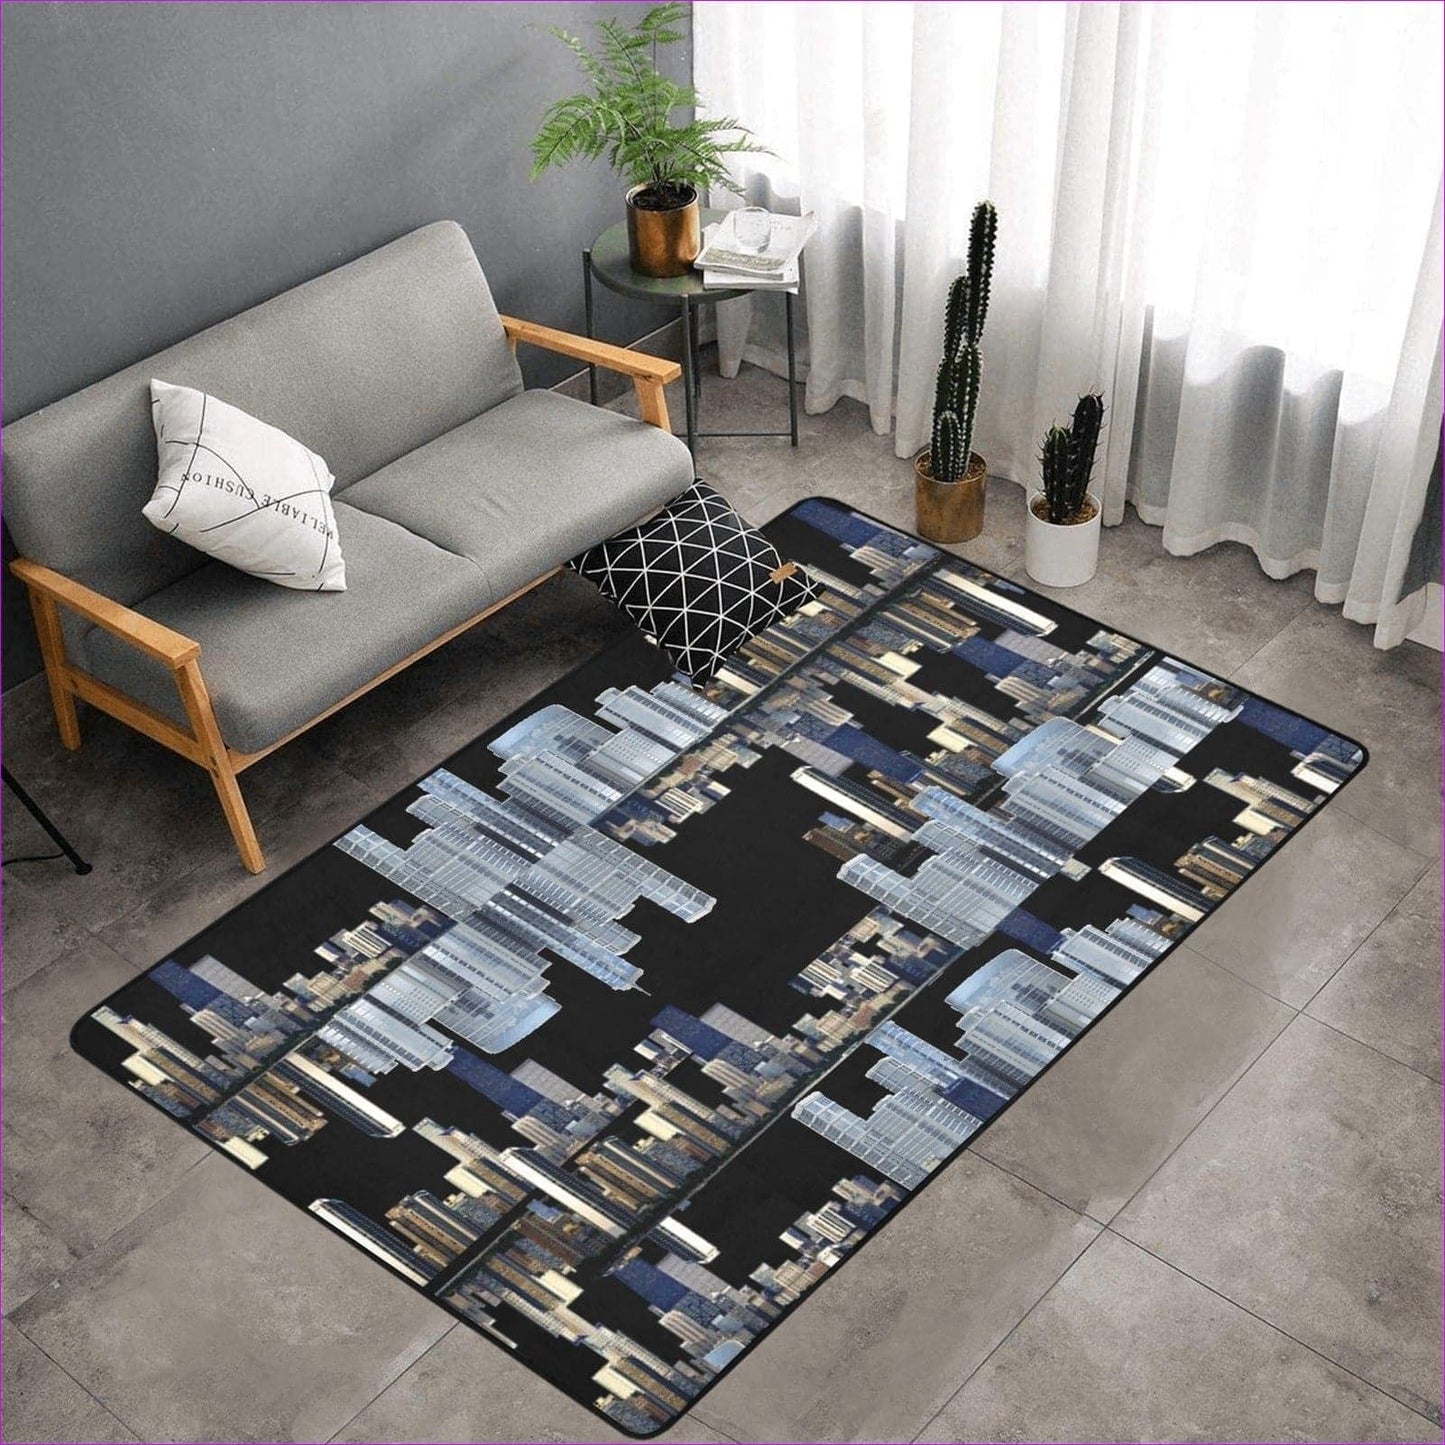 One Size city doubled-black Area Rug with Black Binding 7'x5' City Blocks Area Rug (4 colors) - area rug at TFC&H Co.